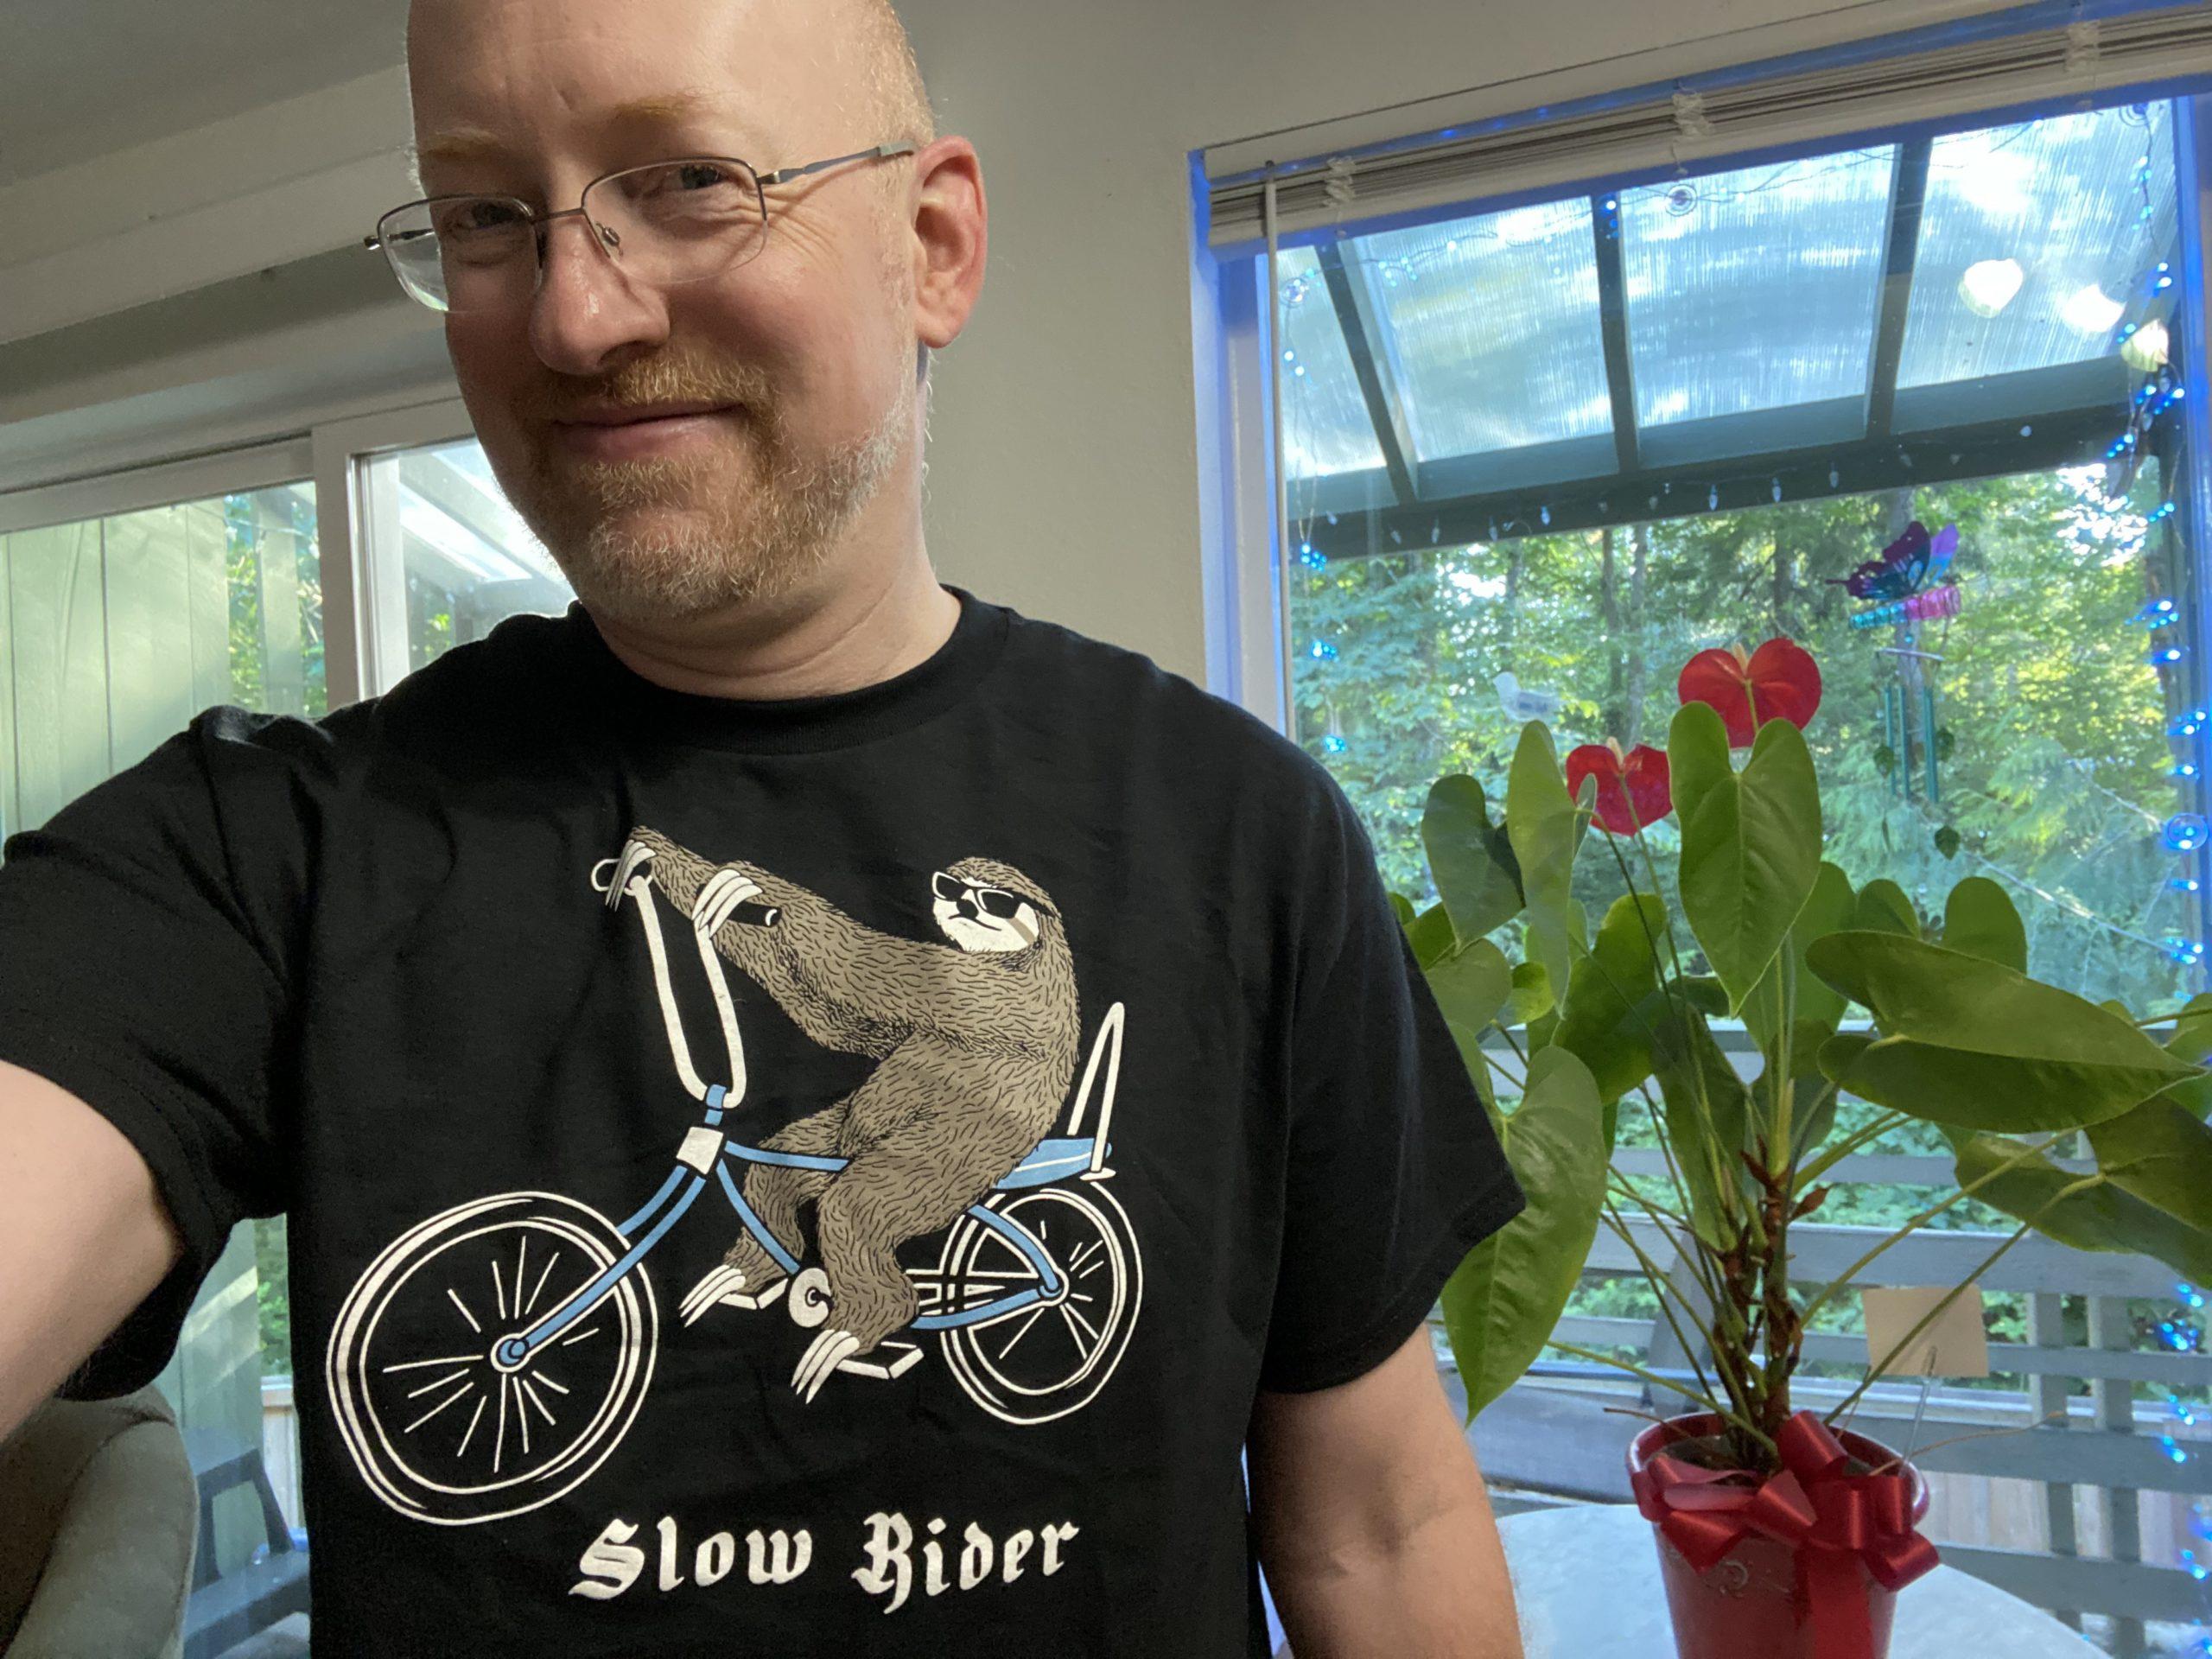 Me in our living room in front of a window, smiling and wearing a black t-shirt with a drawing of a sloth riding a bicycle and the text 'slow rider'.